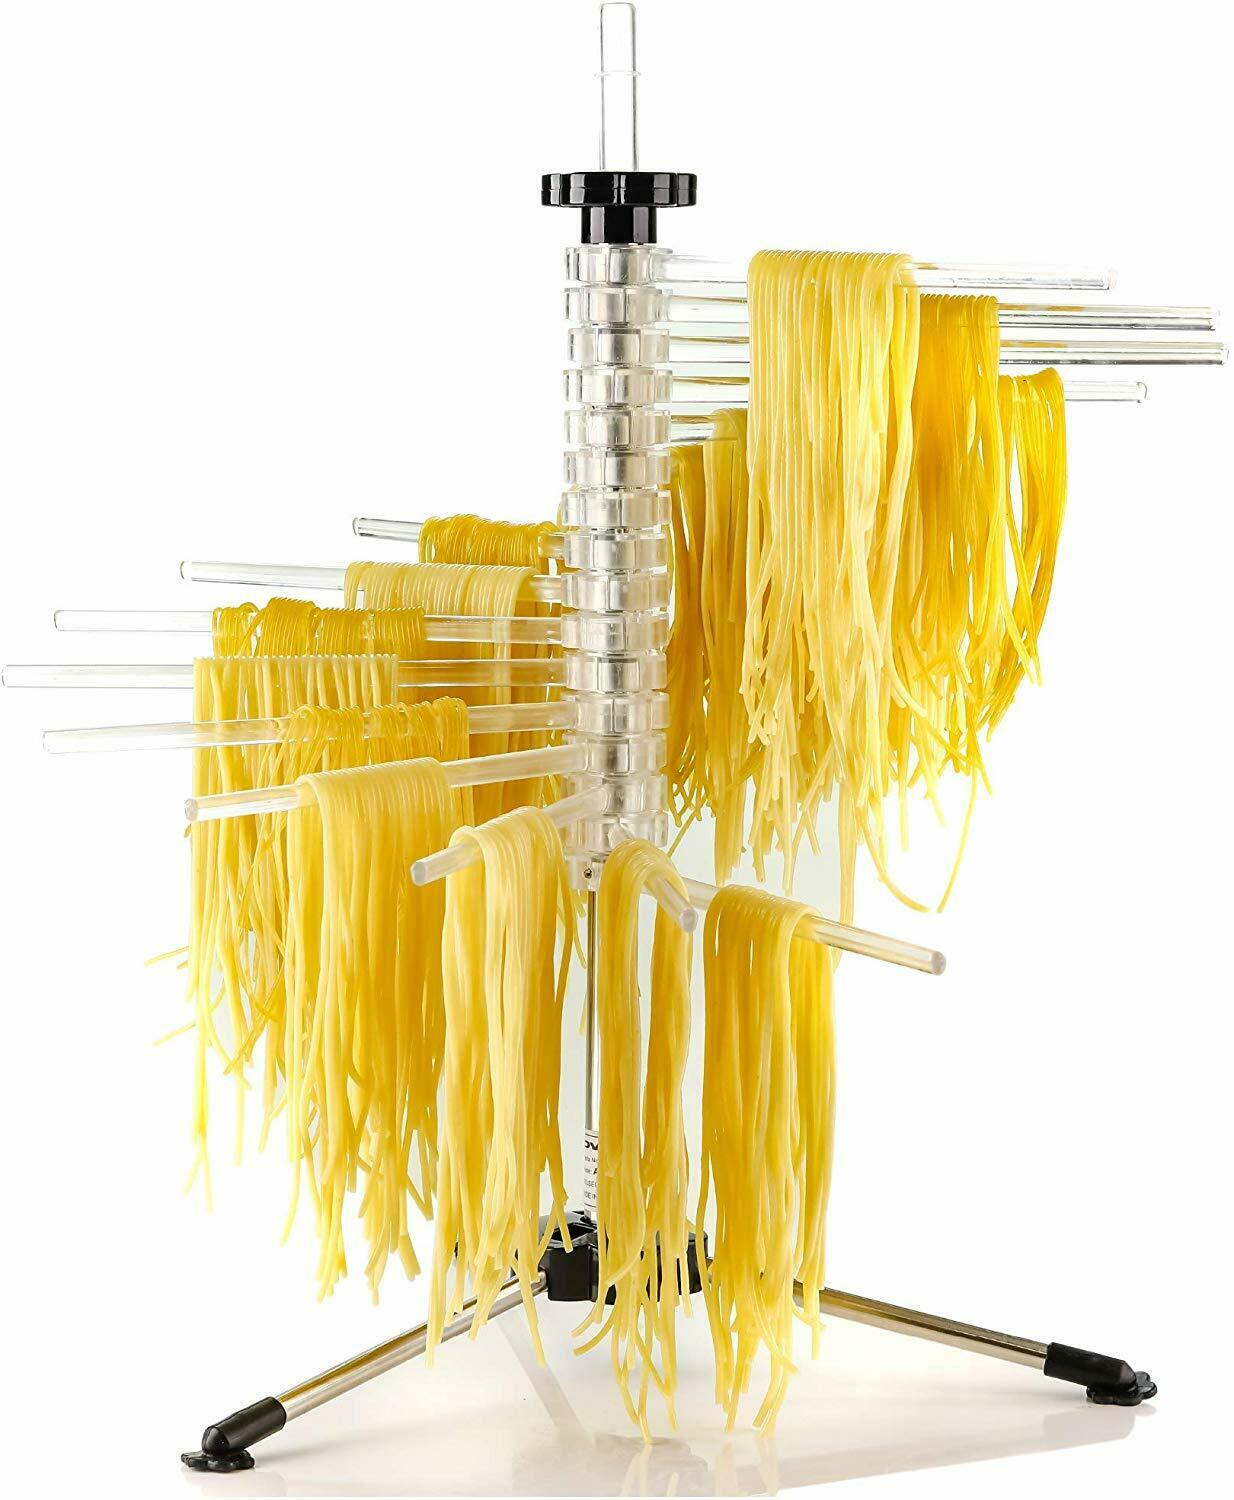 Ovente Pasta Drying Rack Bpa-free Acrylic For Homemade Noodles Acppa900c